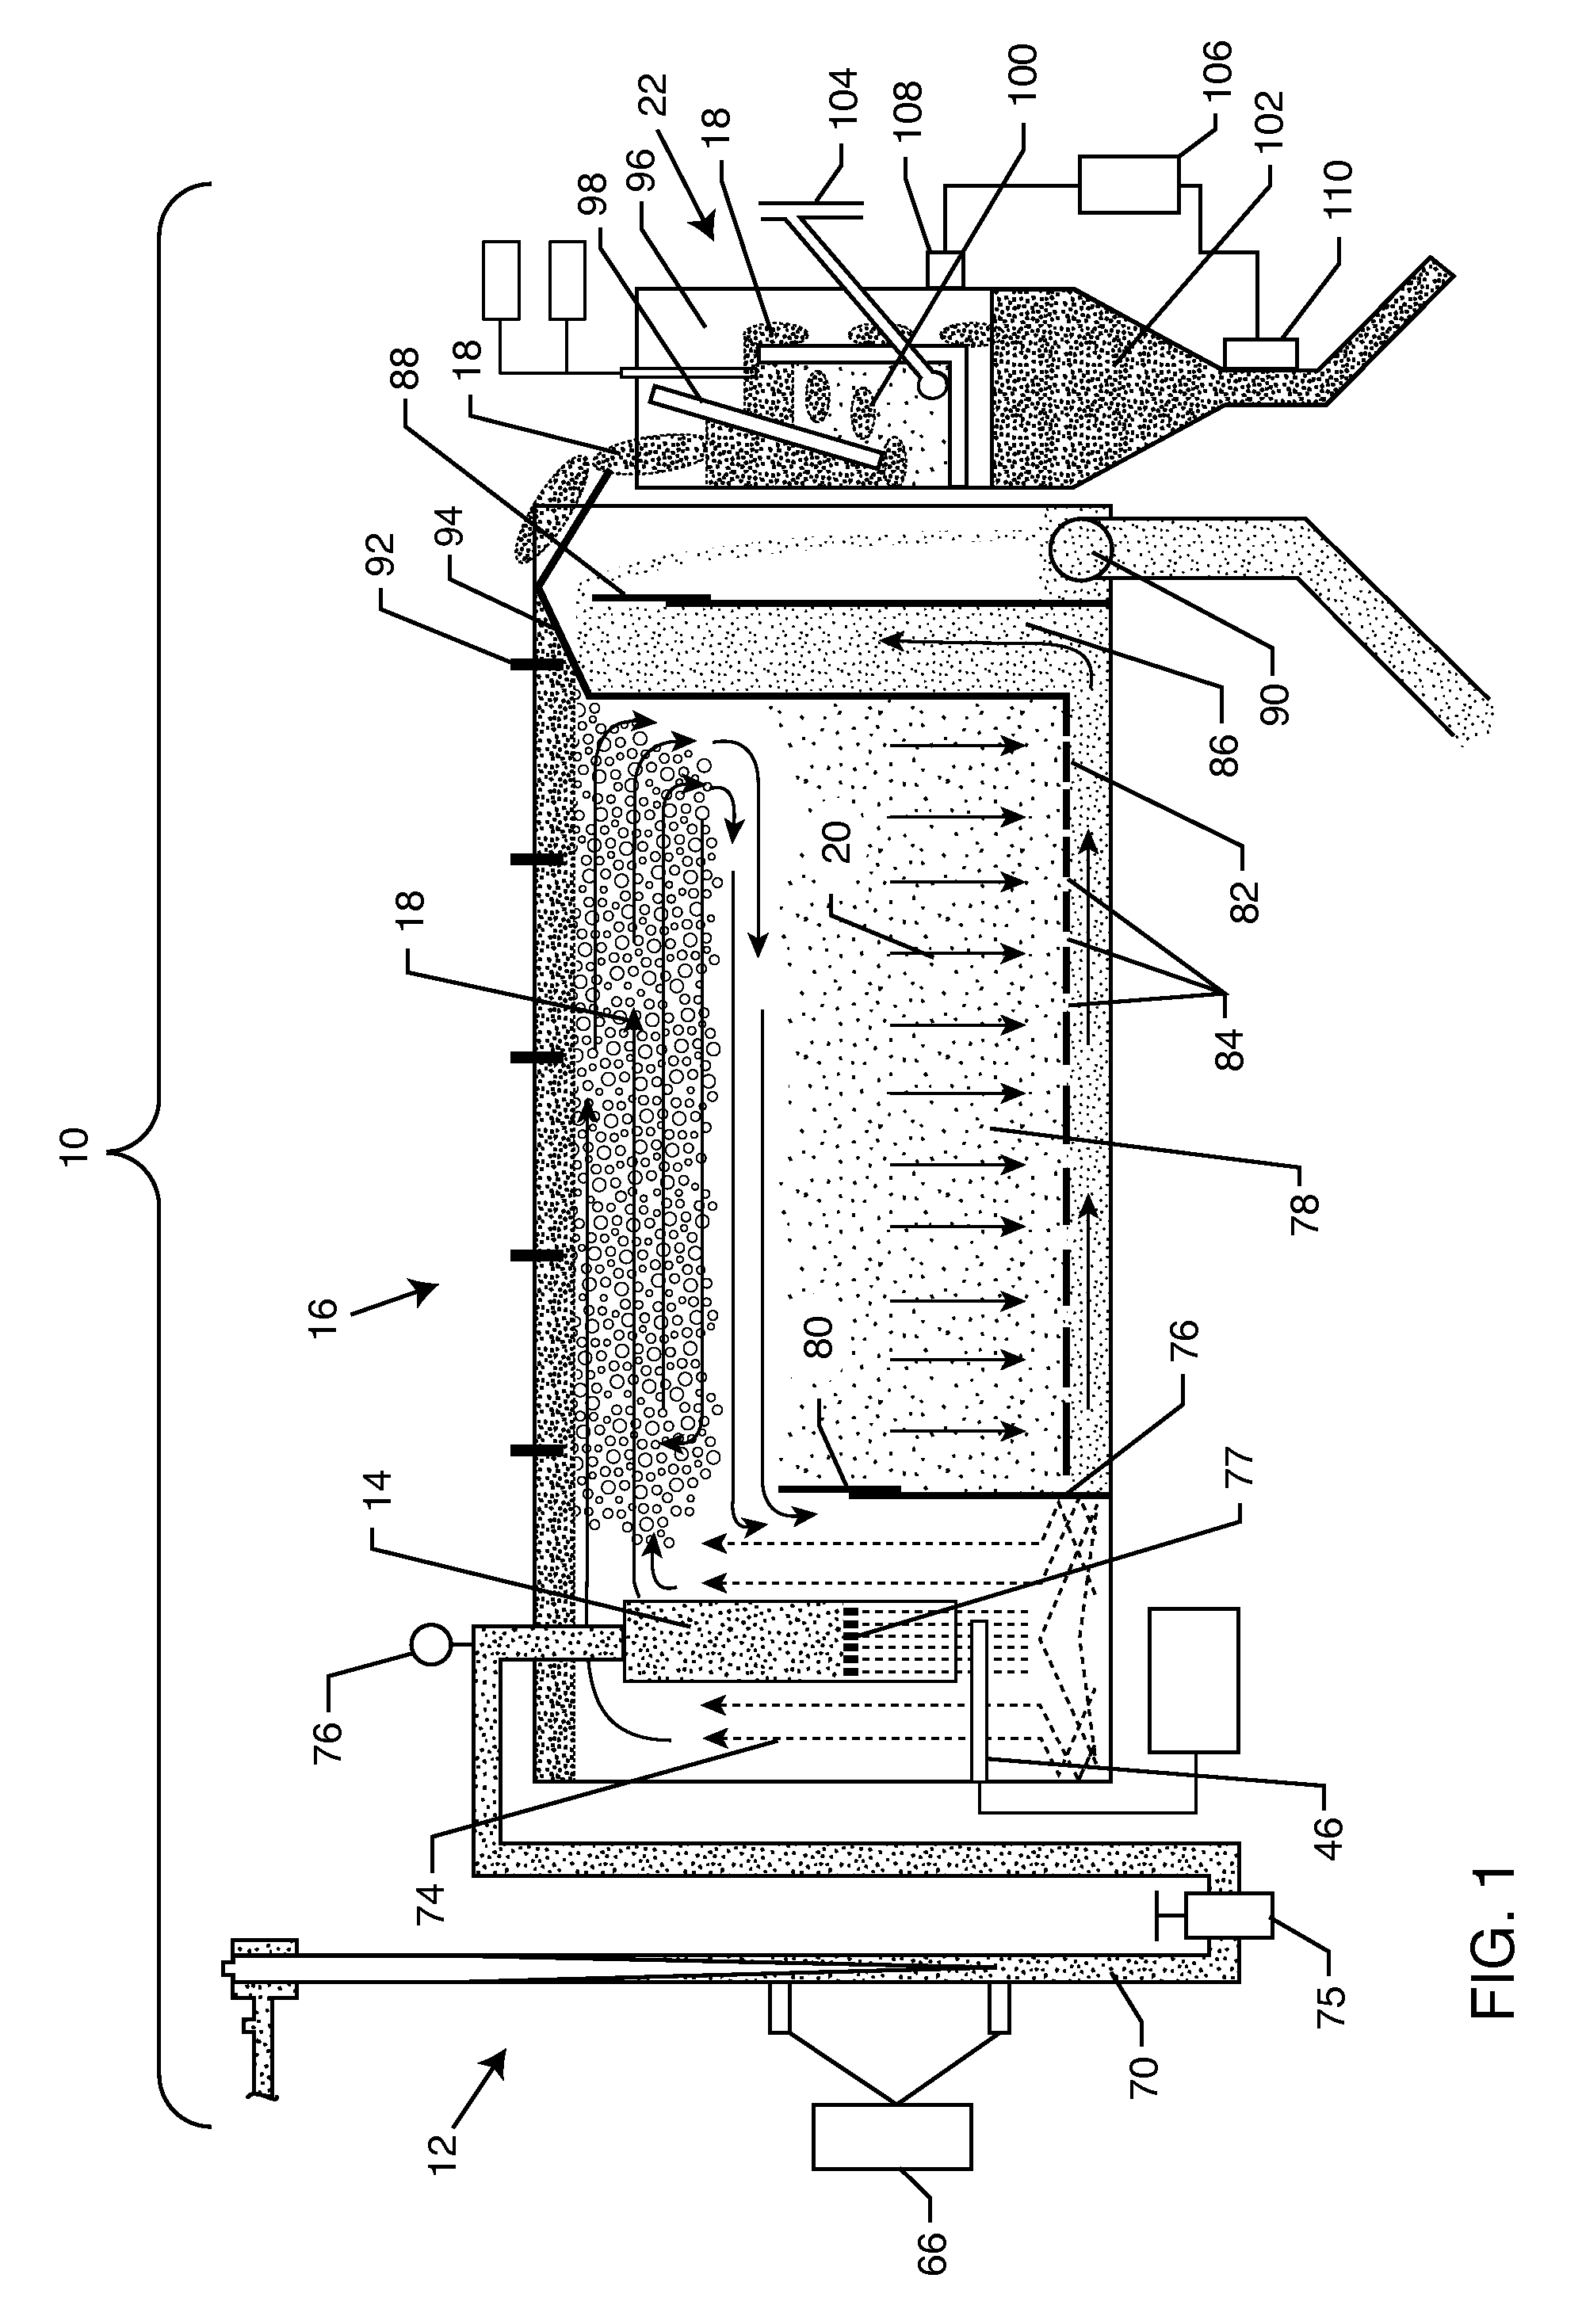 Control system and process for wastewater treatment